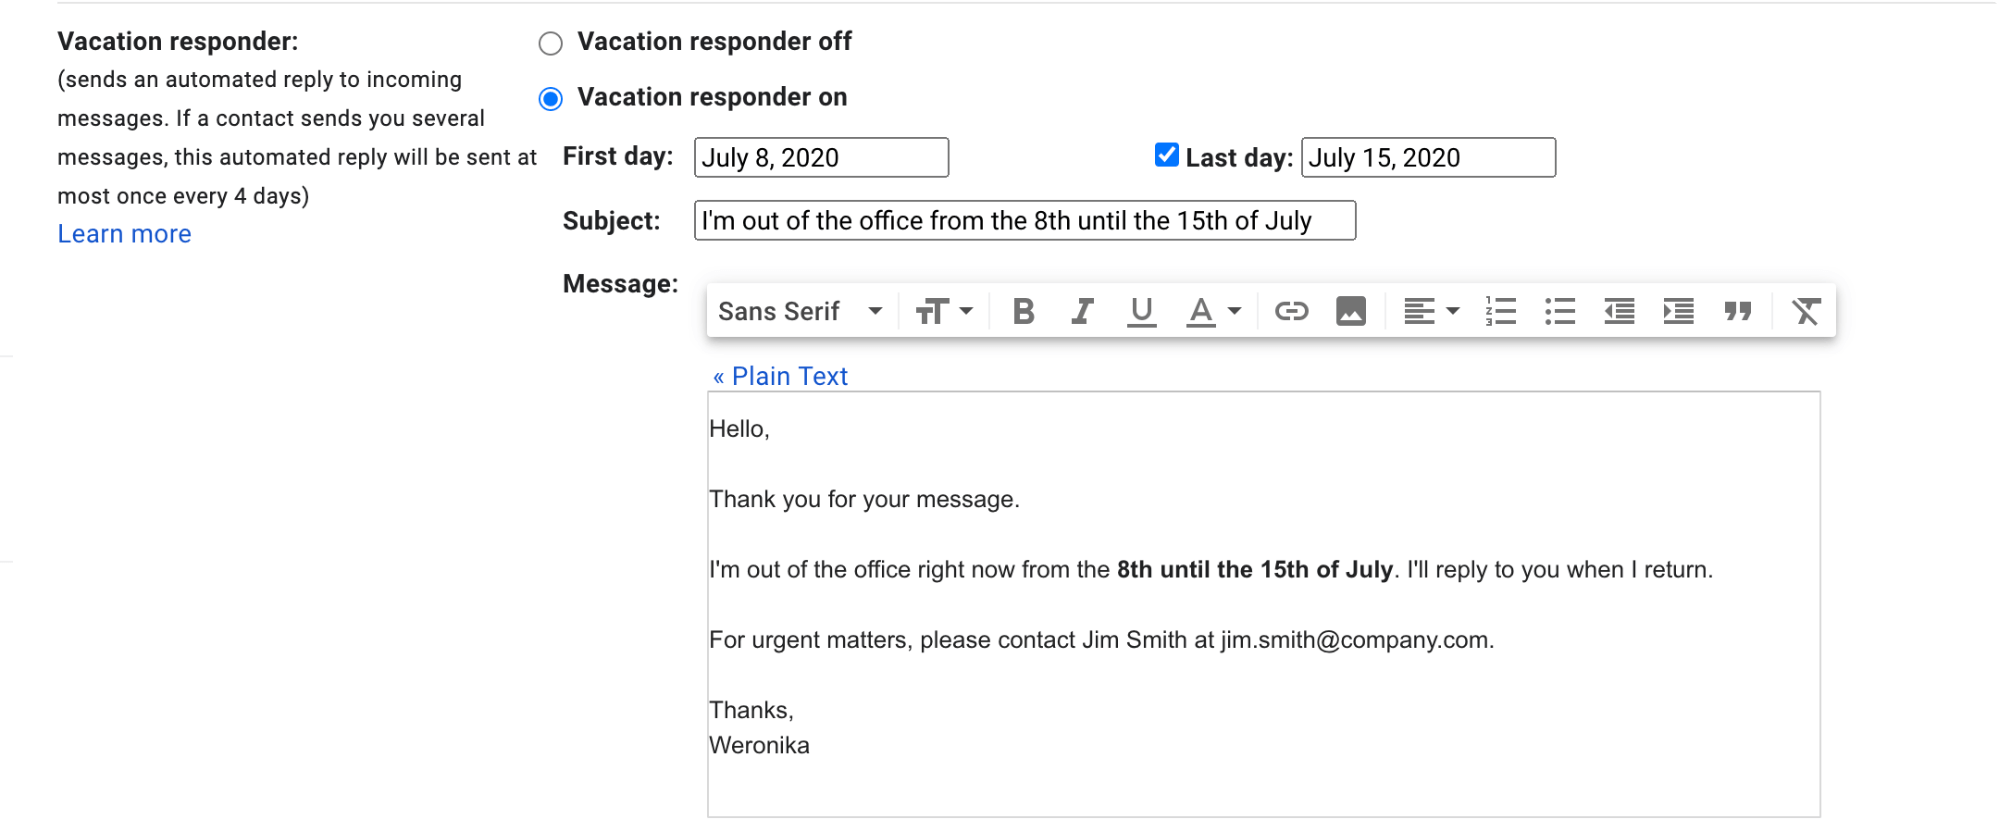 Gmail vacation responder example.